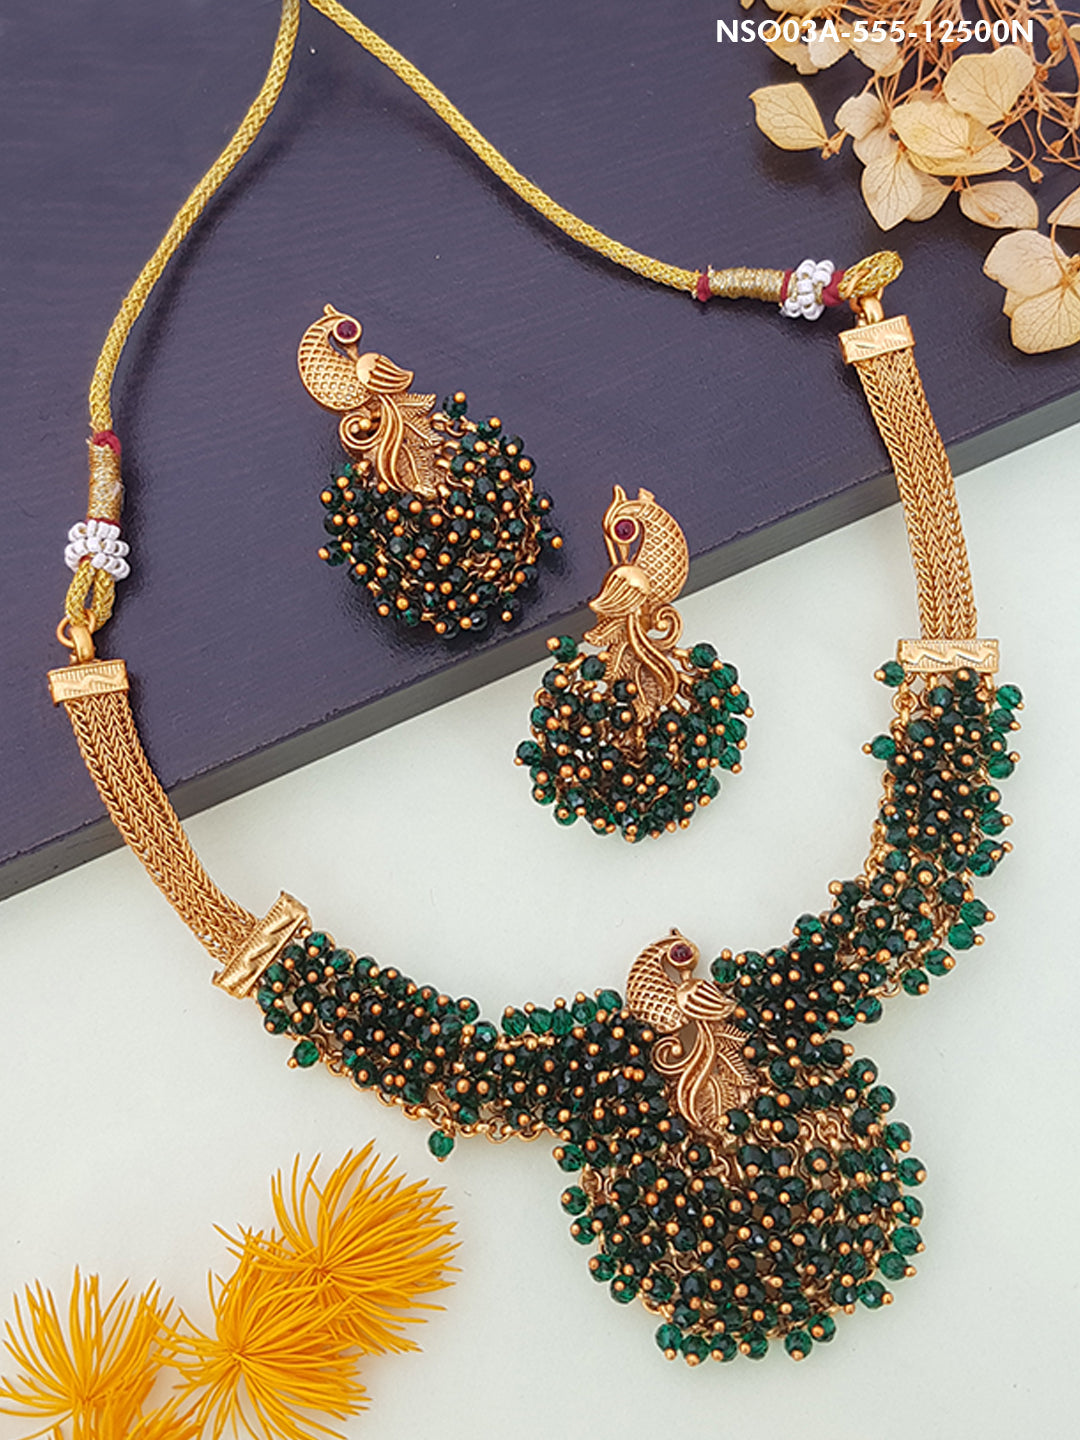 Premium Gold Finish DesignerPeacock Necklace with Crystal drops 12500N